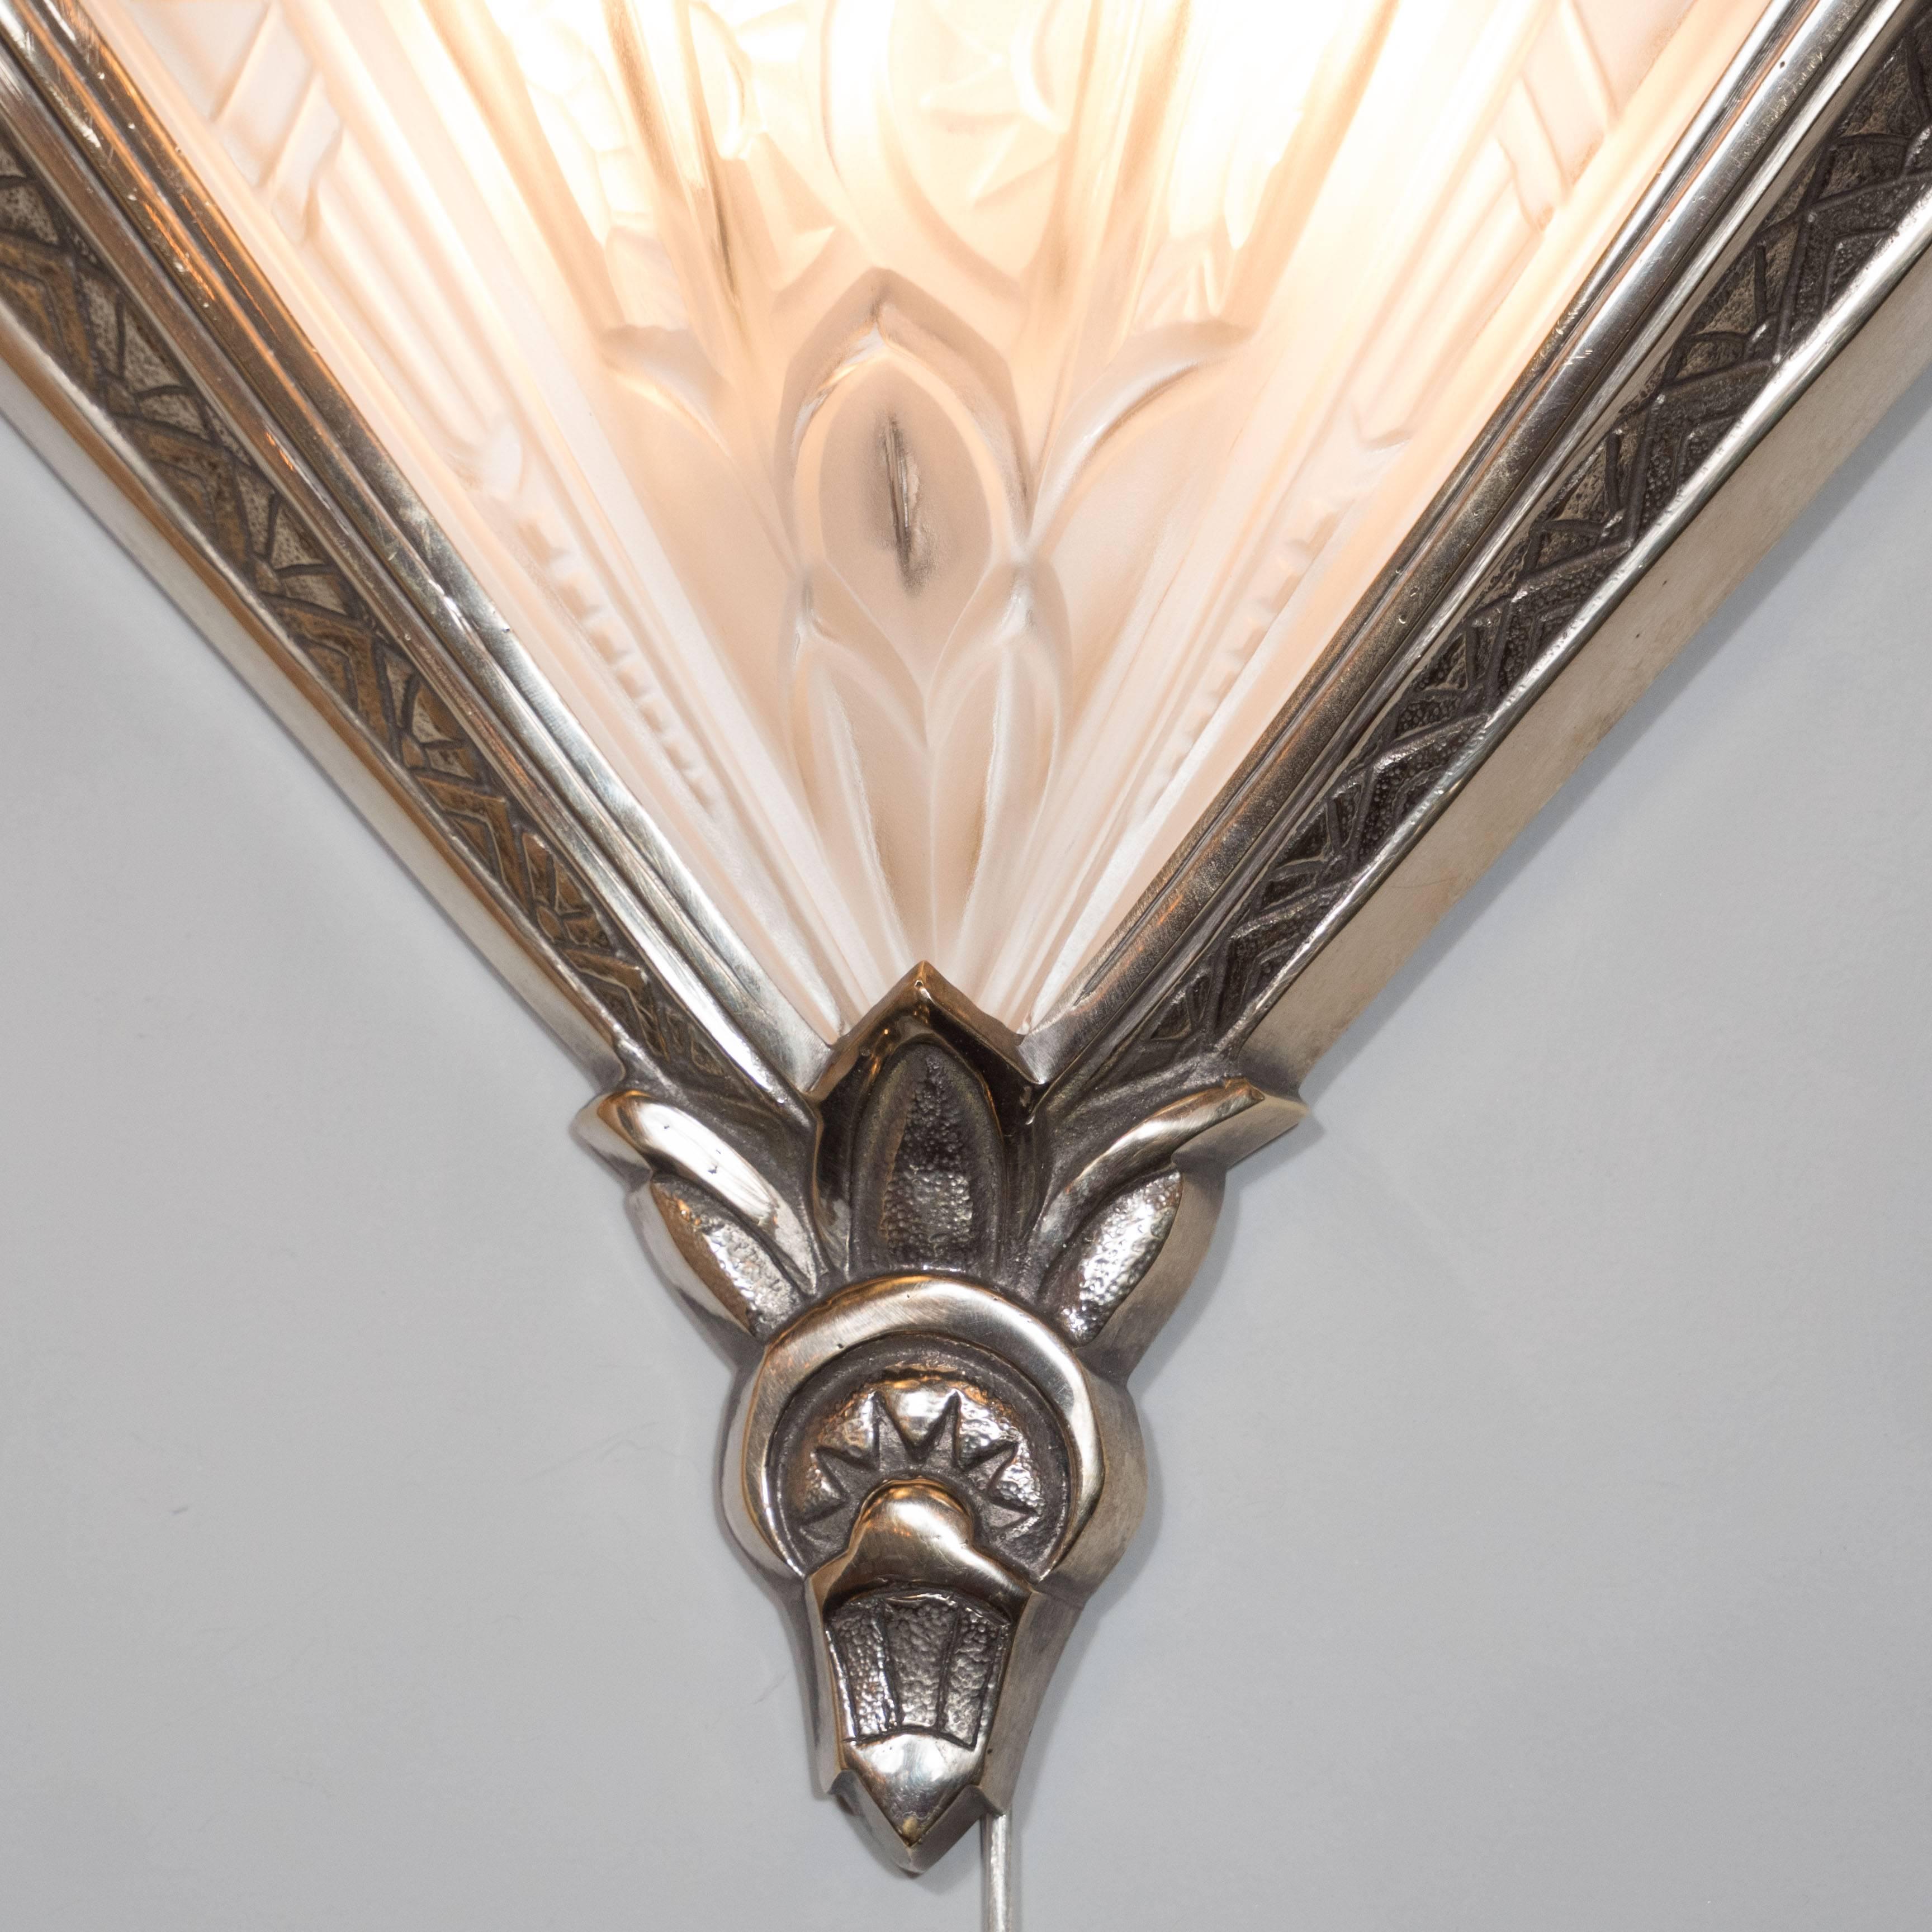 Set of four French Art Deco motif sconces in frosted glass, signed Frontisi. Nickeled bronze V-bases with etched geometric patterns support fan-like frosted glass shades featuring extensive foliate and floral detailing. Each sconce is fitted with